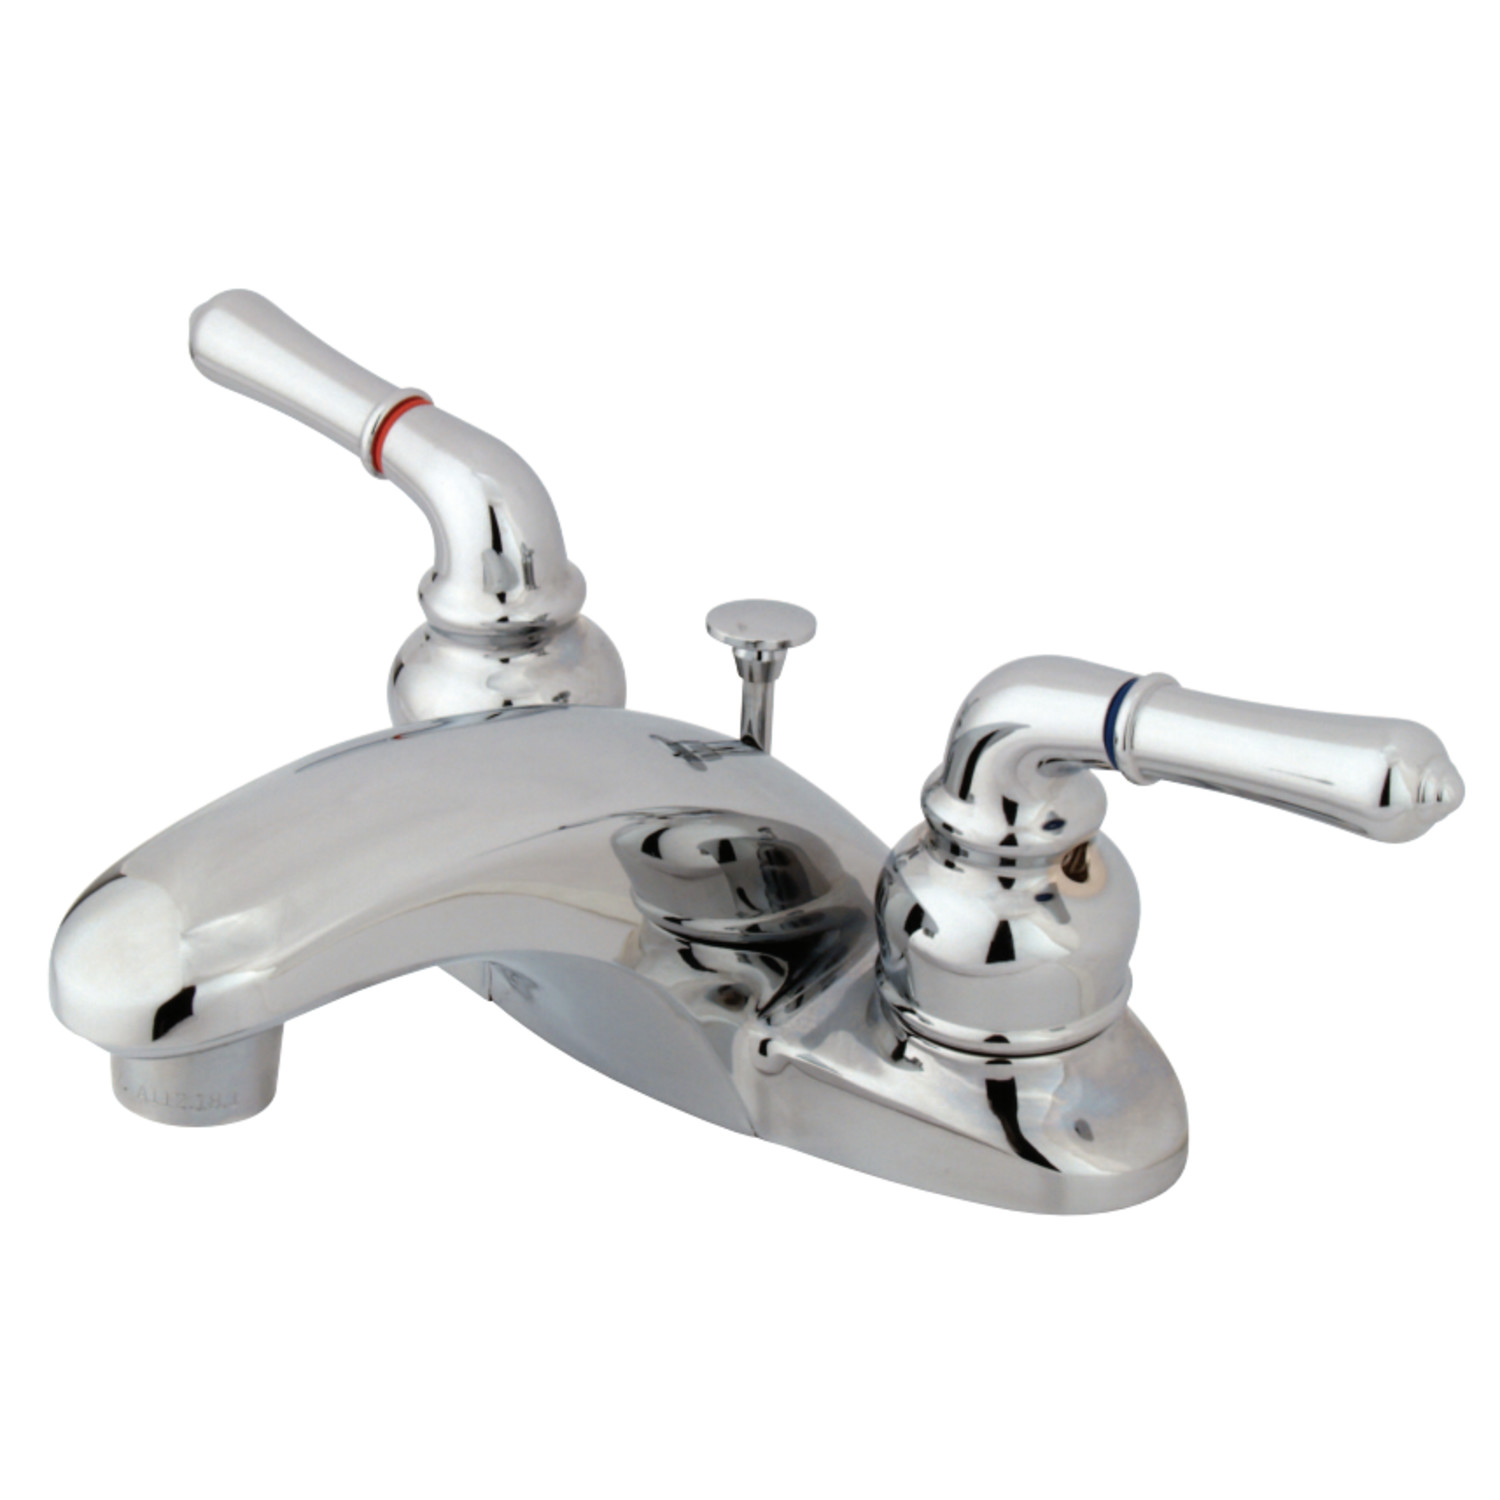 Kingston Brass KB621B 4 in. Centerset Bathroom Faucet, Polished Chrome - image 1 of 2